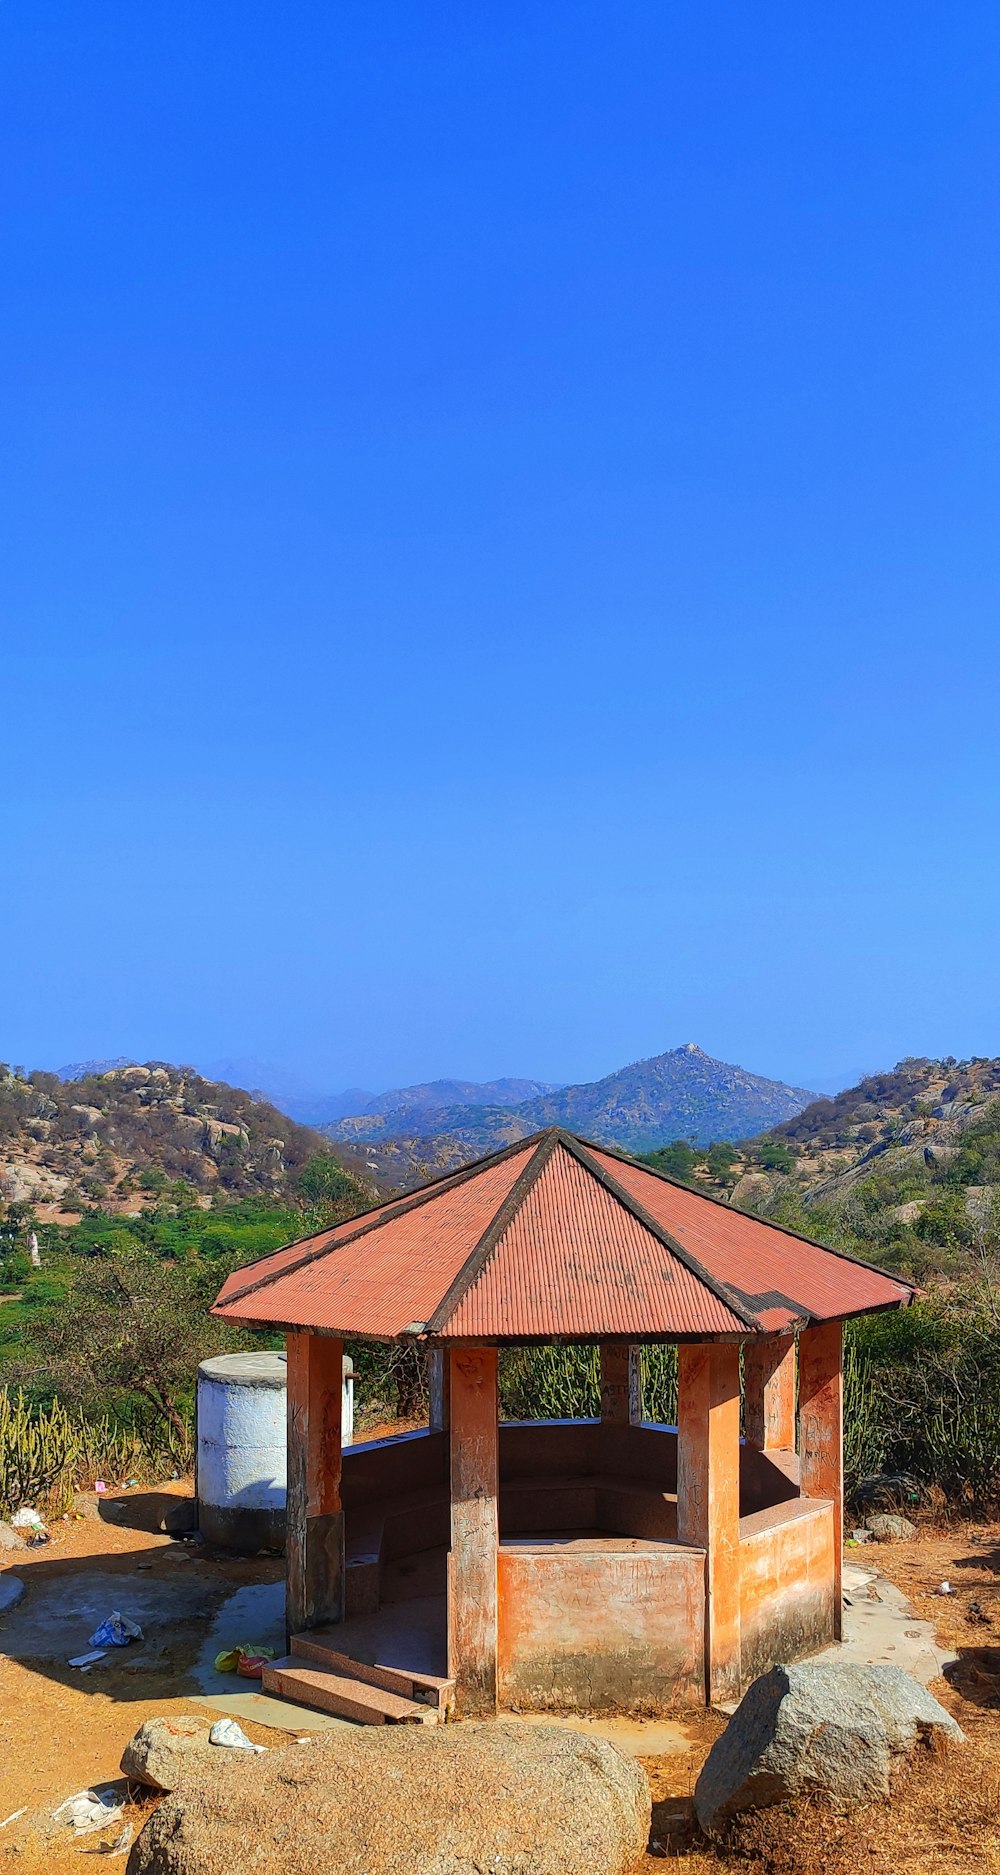 a gazebo in the middle of a field with mountains in the background